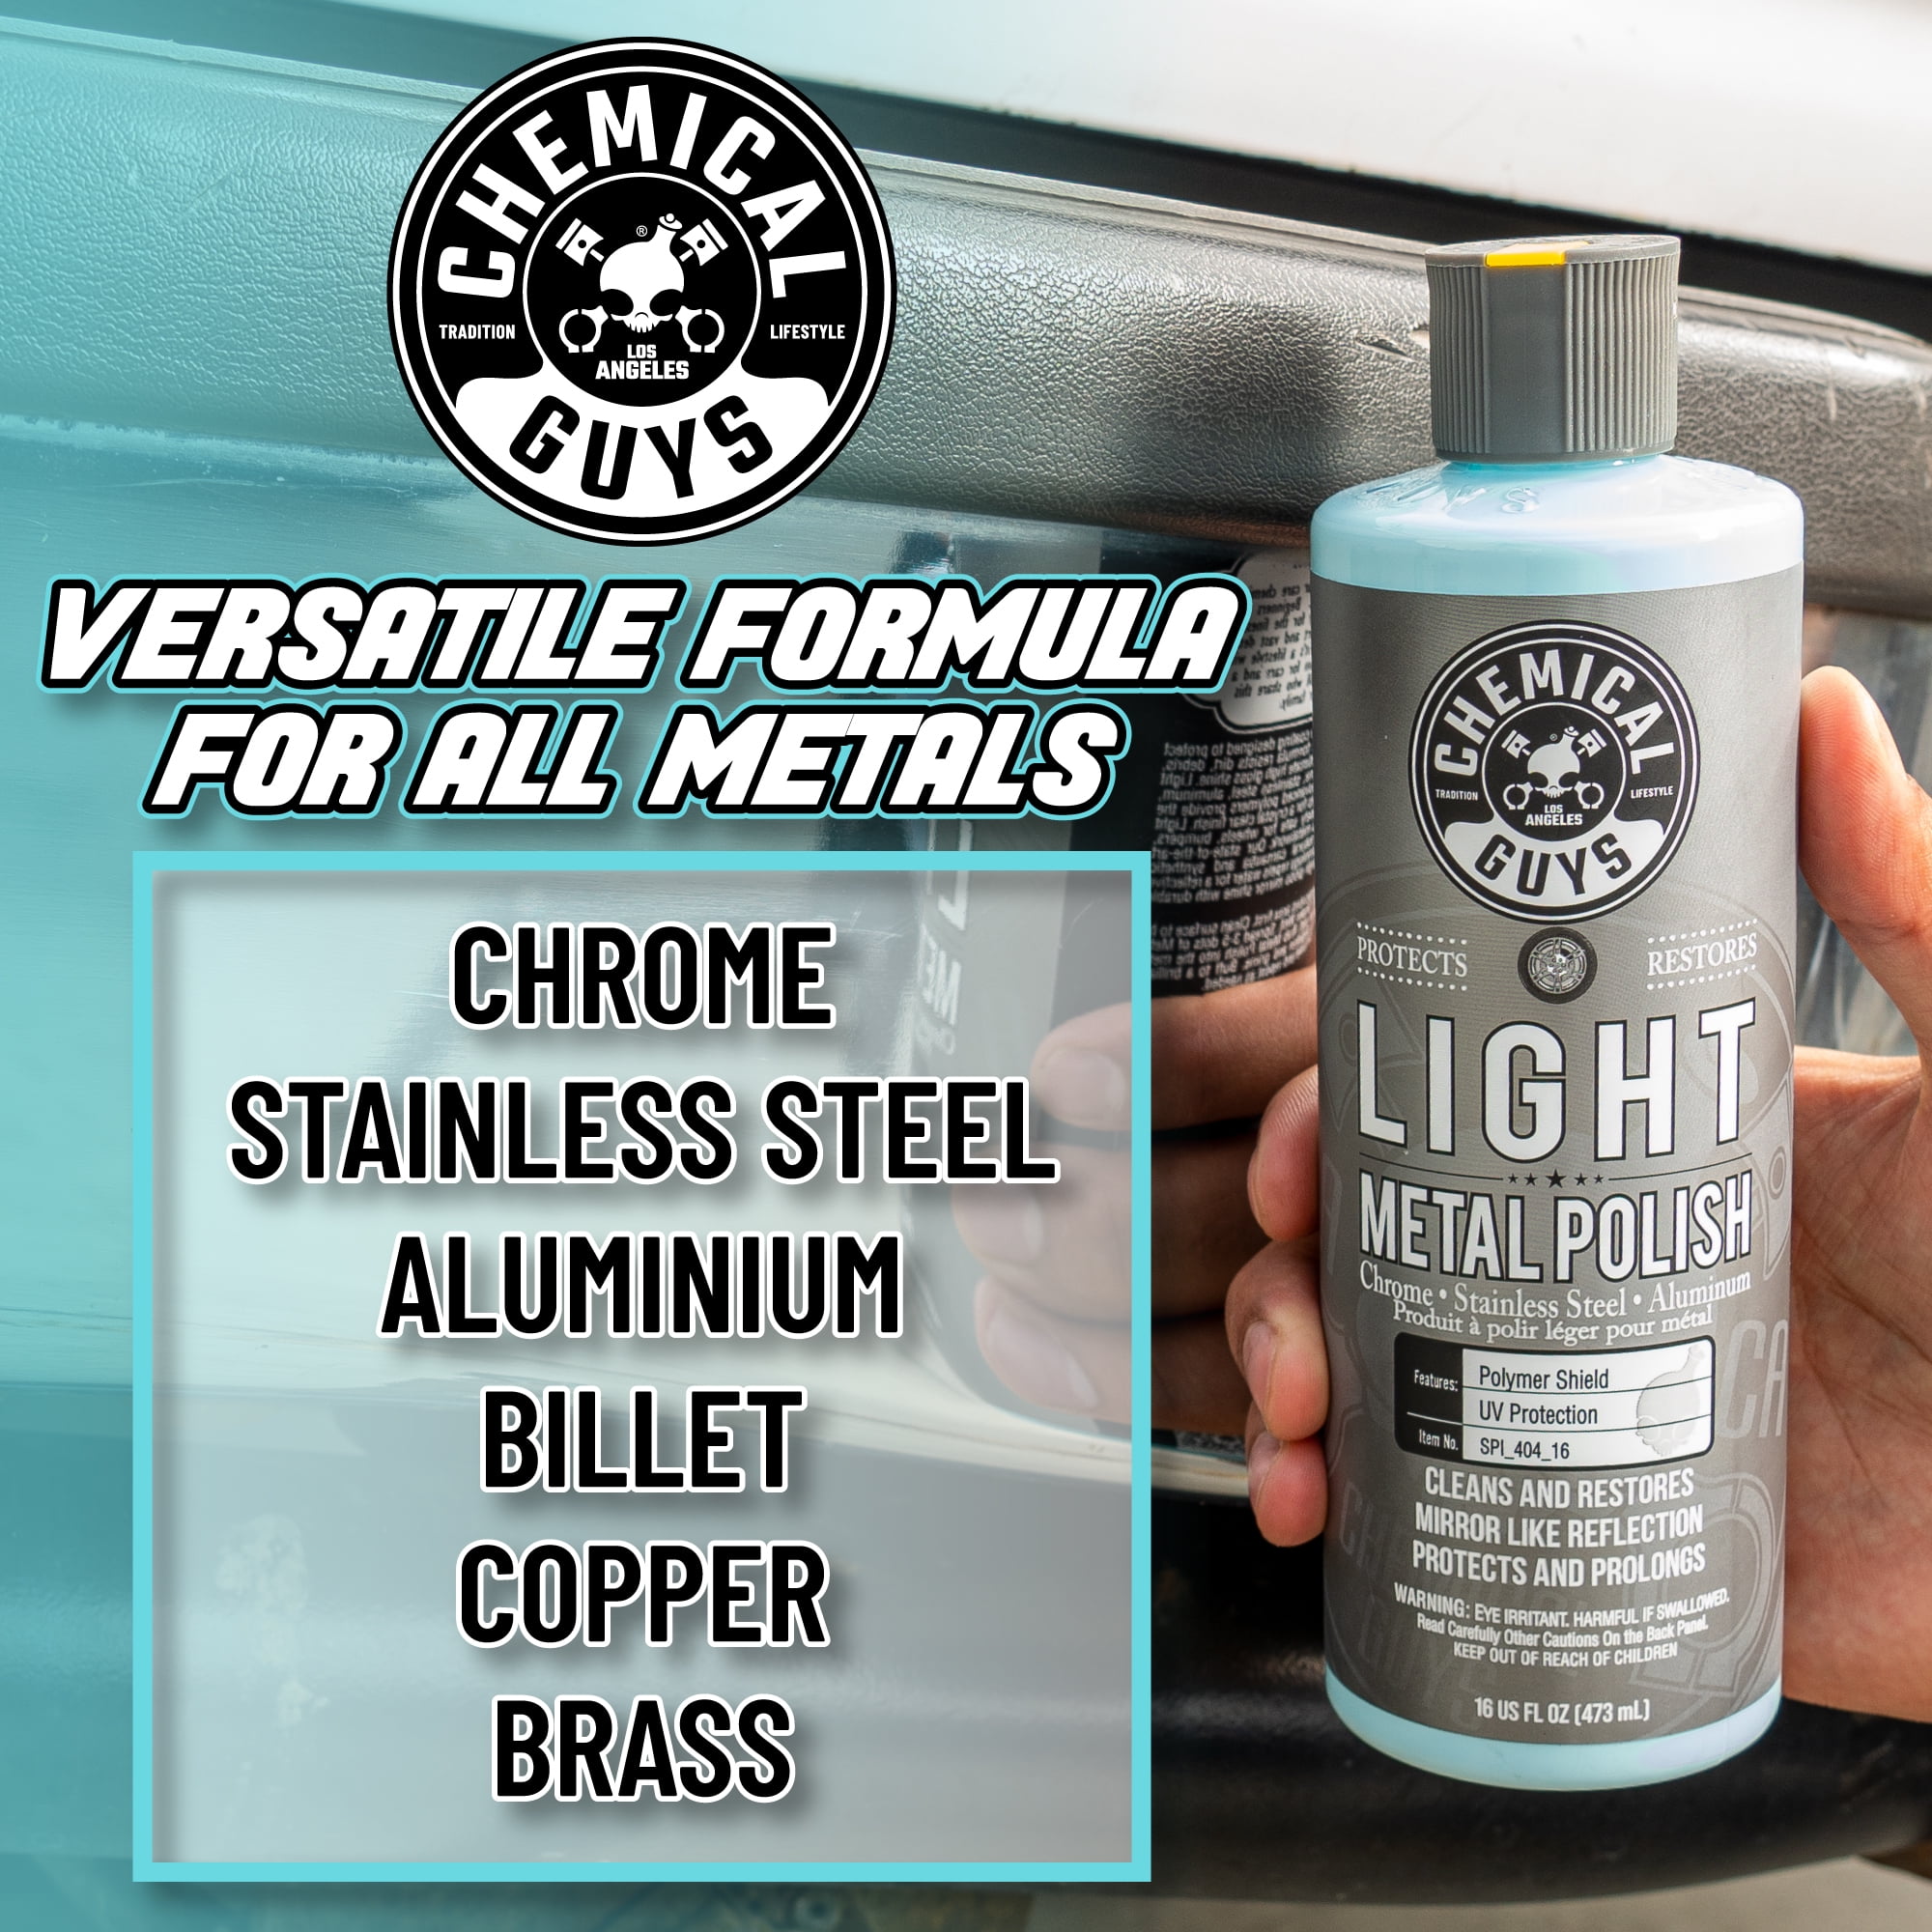 Product Review: Chemical Guys Metal Polish – Ask a Pro Blog